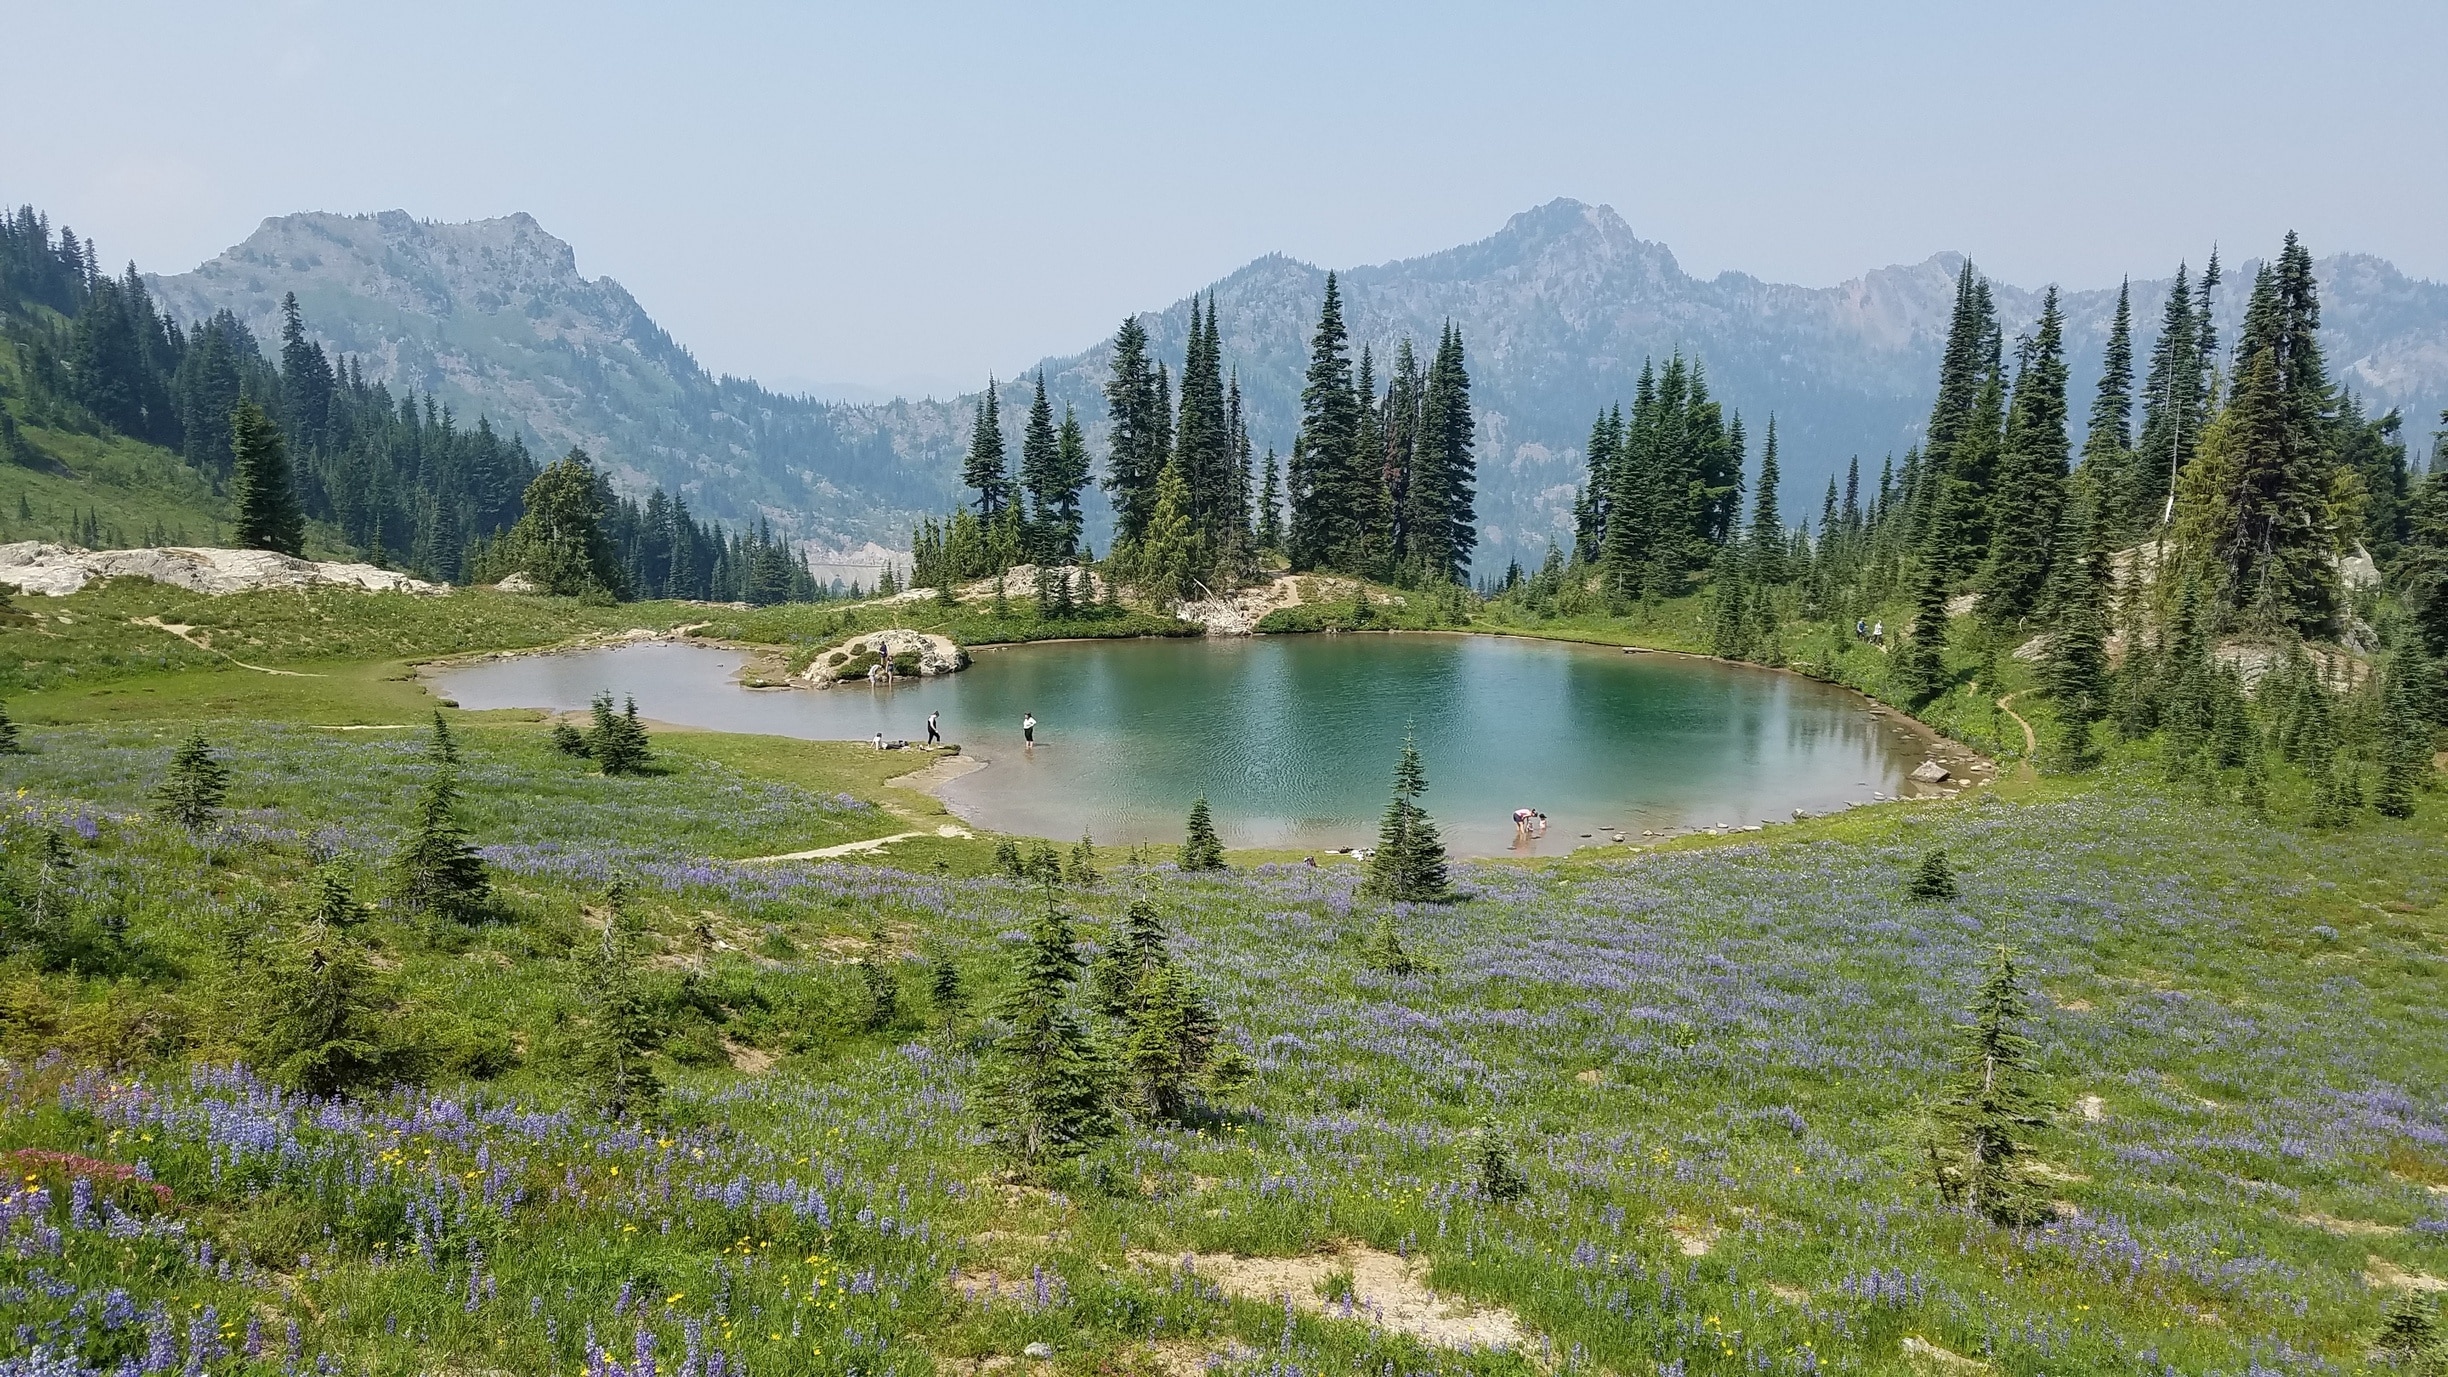 A spectacular 2.8-mile loop past views of Dewey Lake and Tipsoo Lake...and this gem of a little lake with fields of lupine, paintbrush, and heather is bestvin late July and early August. Be prepared for biting bugs!
#MtRanier
